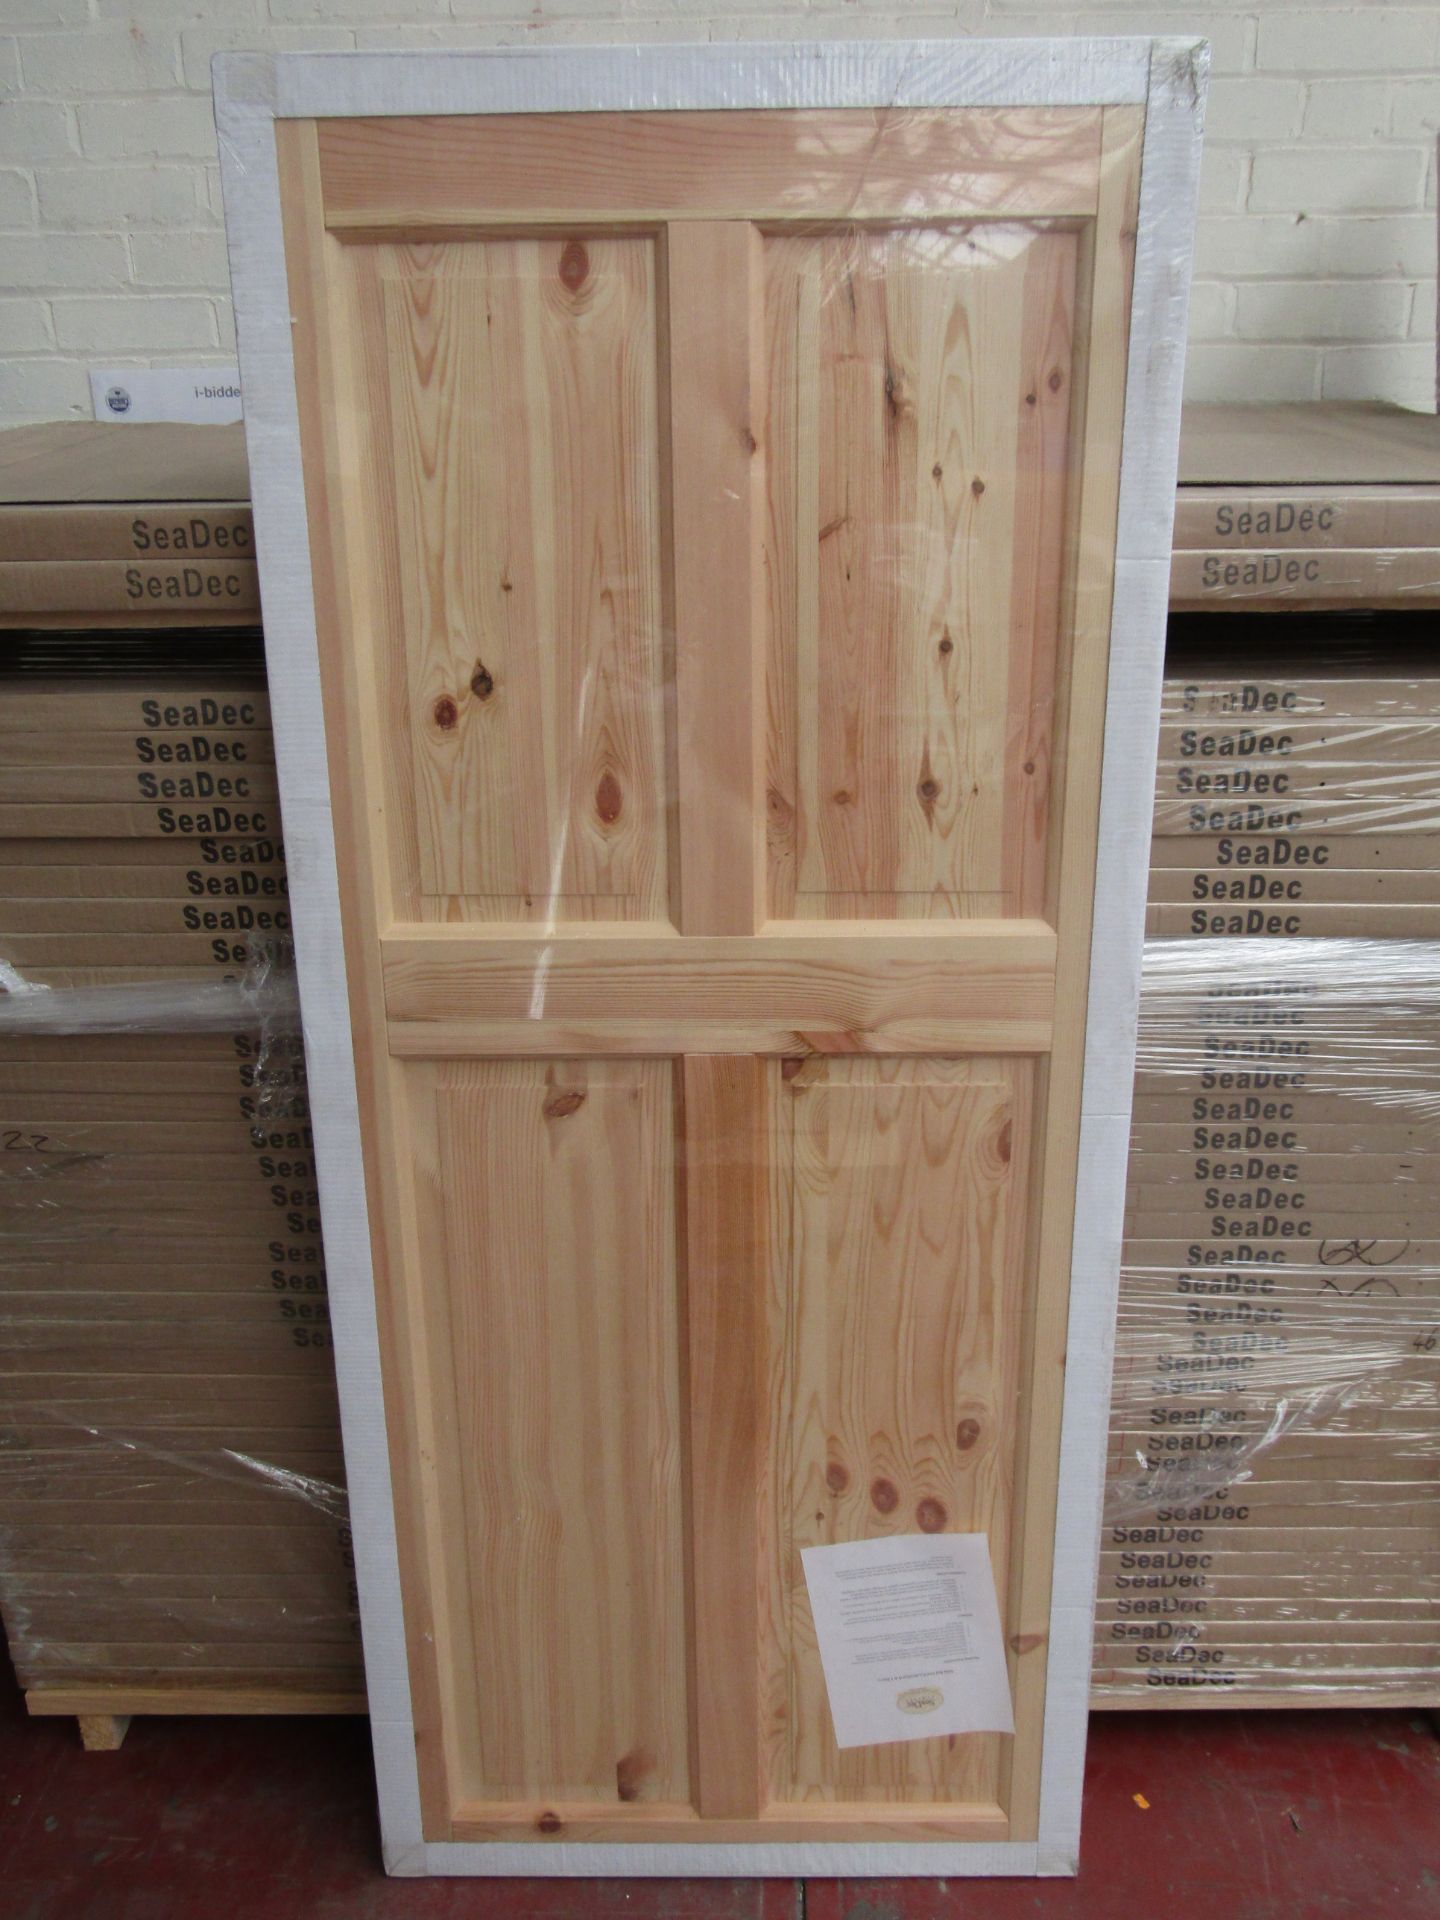 Seadec 4 Panel 78 x 33, Straight Top Knotty Pine Veneer Solid Wood Door, Pre-finished to a High